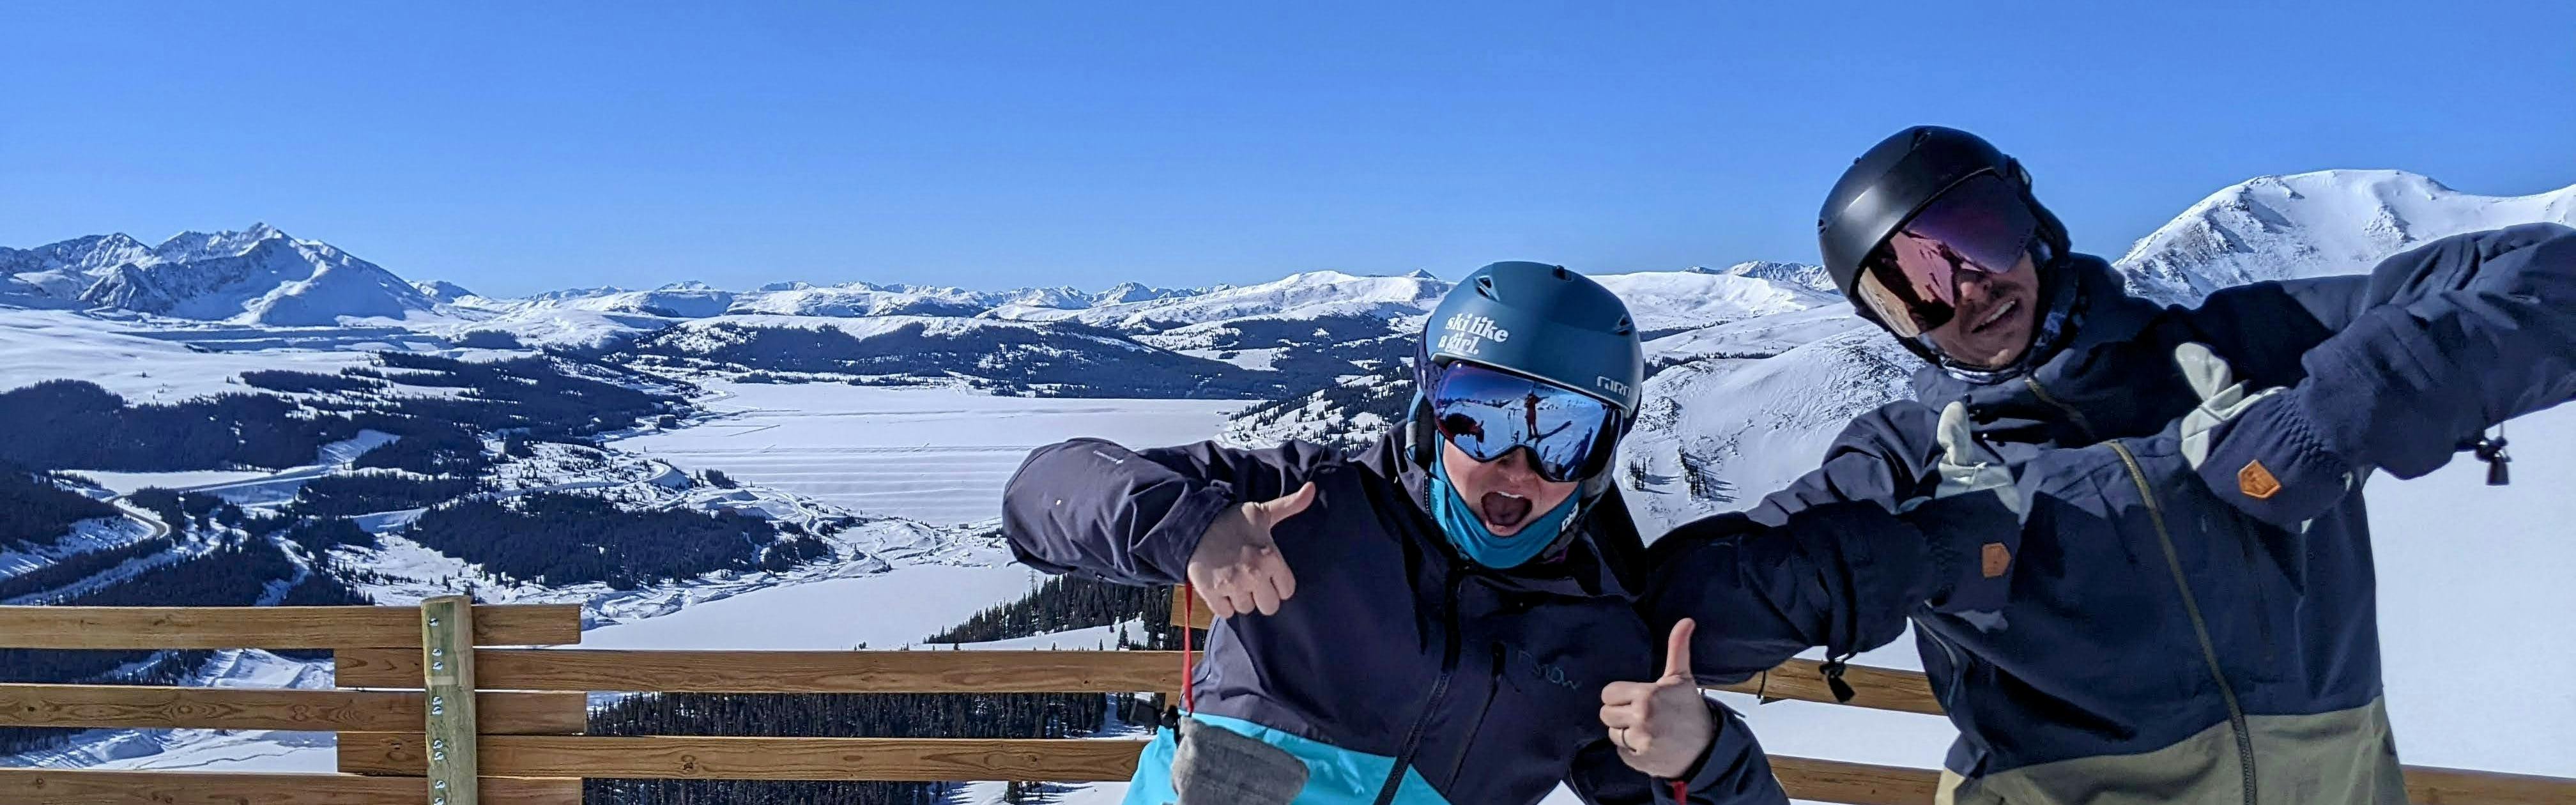 Two skiers at the top of a ski run giving a thumbs up to the camera. 